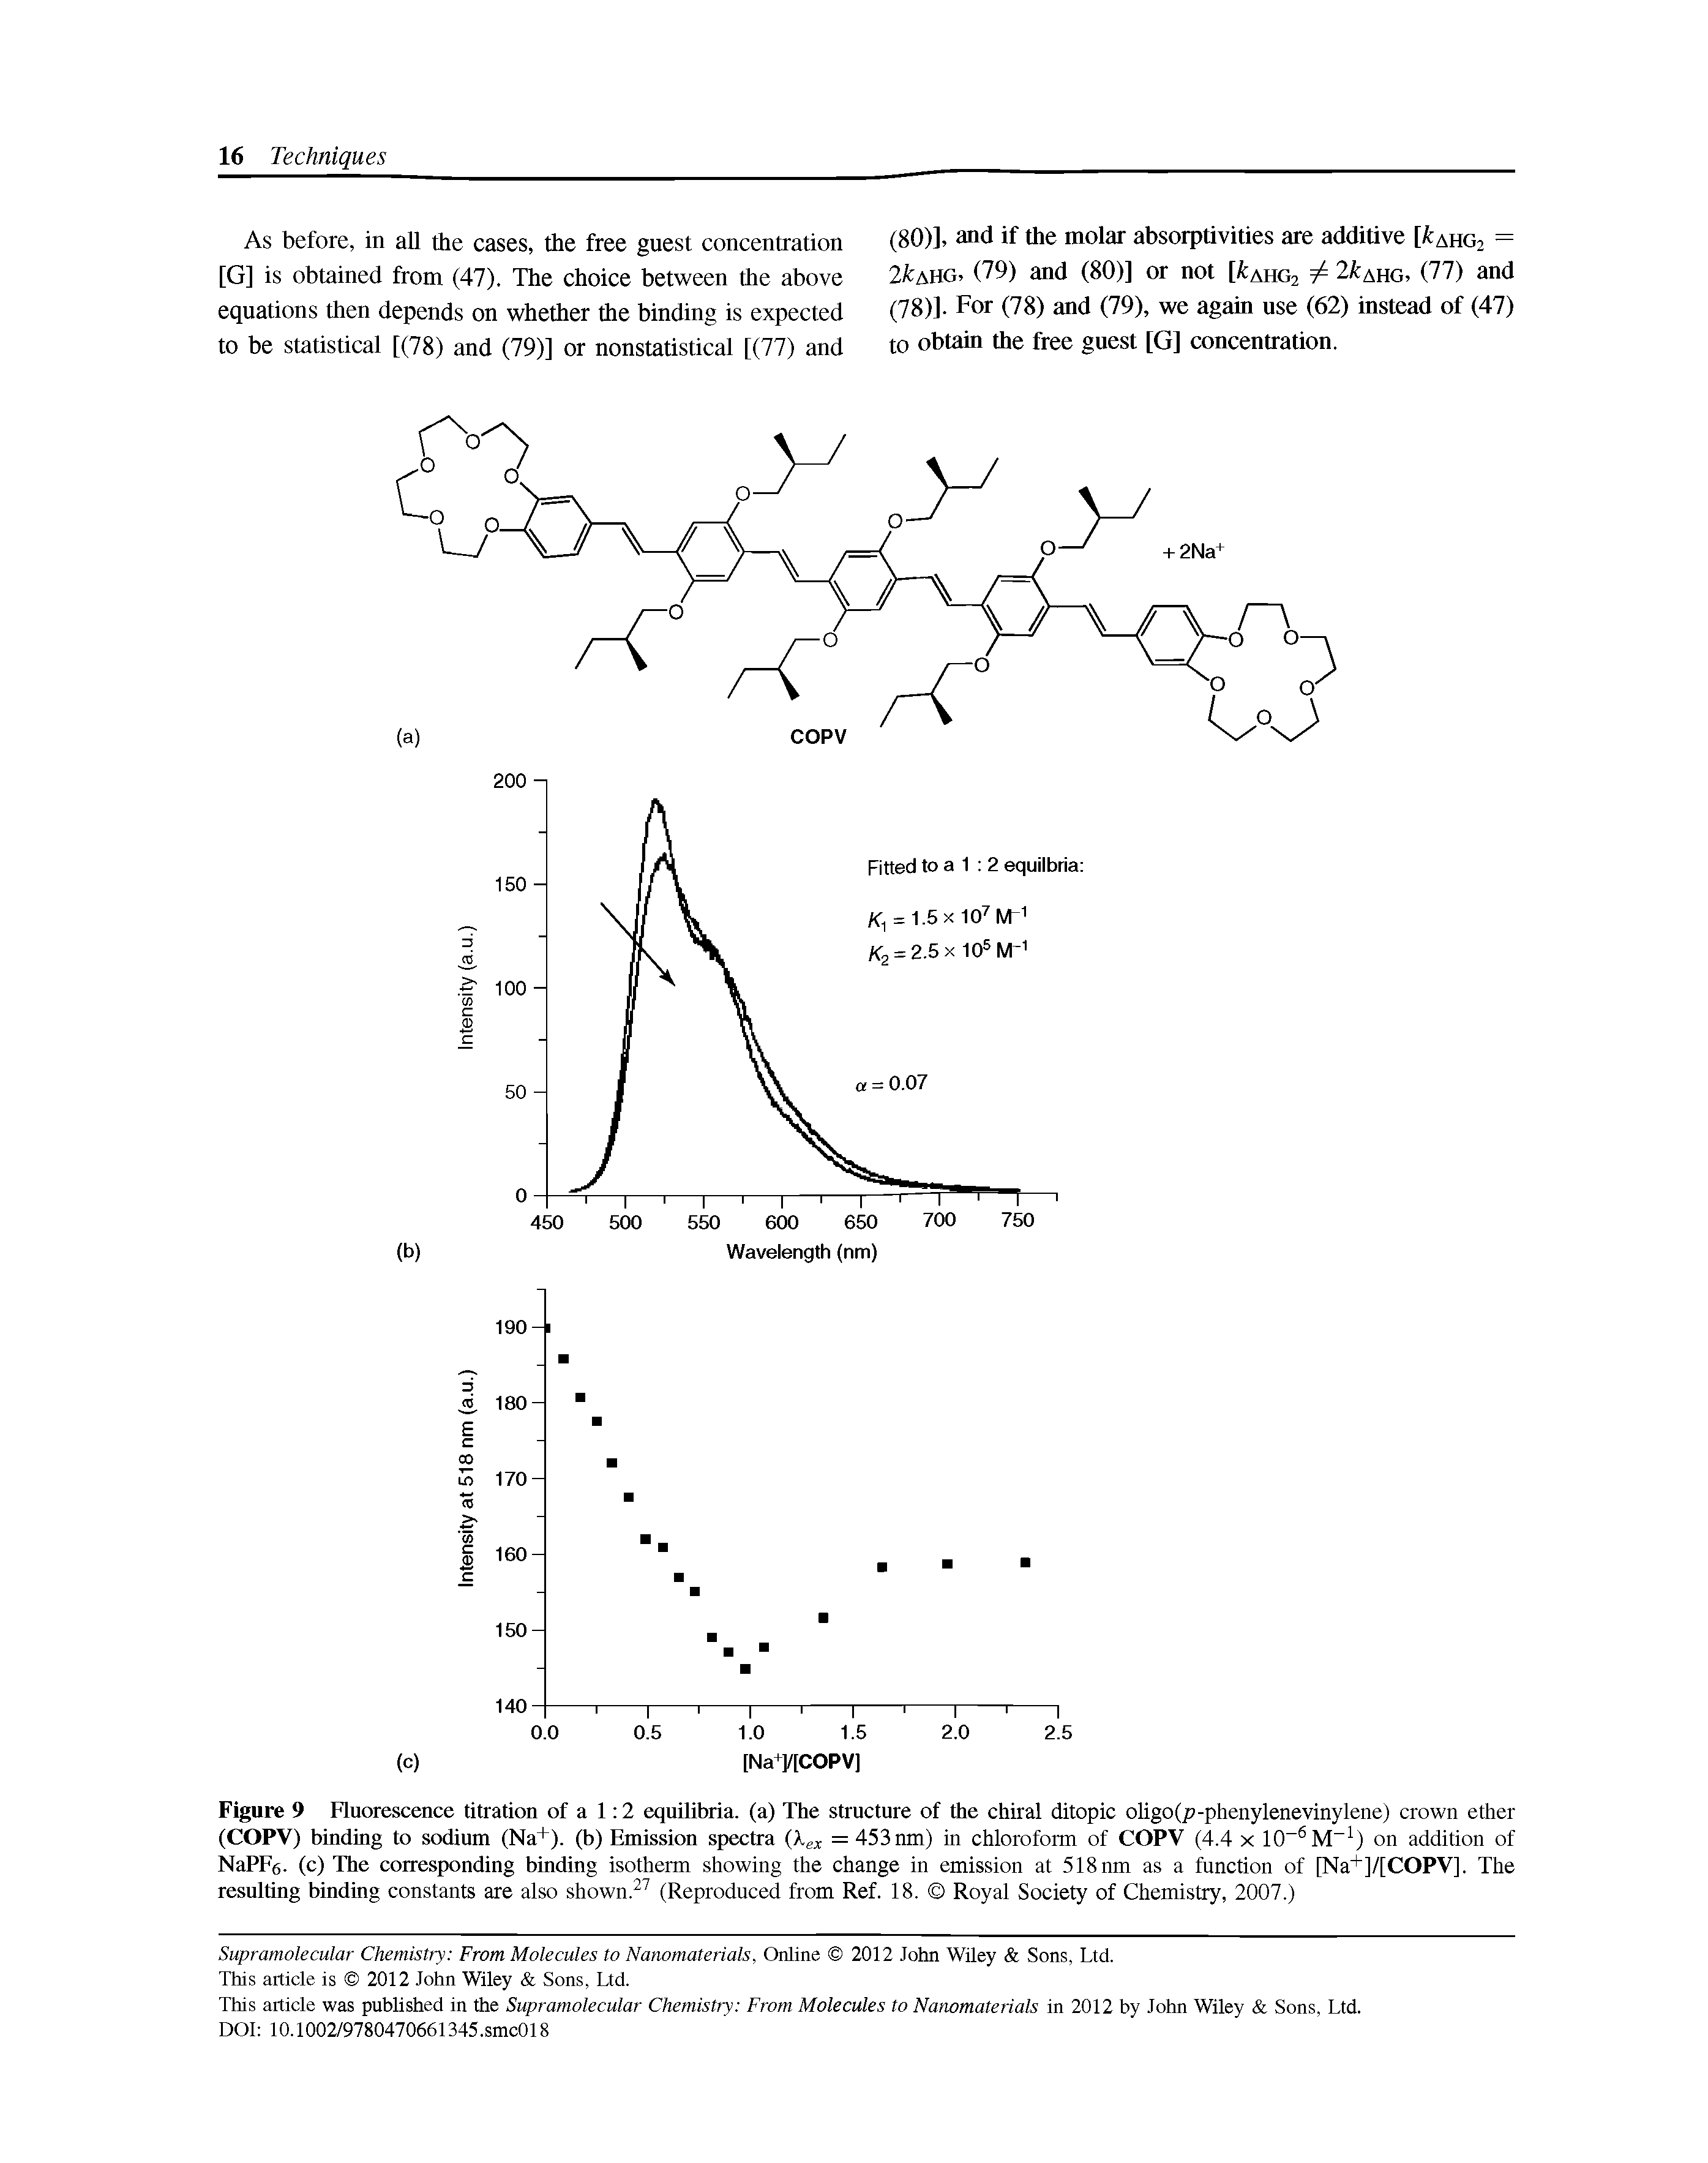 Figure 9 Ruorescence titration of a 1 2 equilibria, (a) The structure of the chiral ditopic oligo(p-phenylenevinylene) crown ether (COPY) binding to sodium (Na+). (b) Emission spectra = 453 nm) in chloroform of COPY (4.4 x 10 M ) on addition of NaPFe. (c) The corresponding binding isotherm showing the change in emission at 518 nm as a function of [Na+]/[COPY]. The resulting binding constants are also shown. (Reproduced from Ref. 18. Royal Society of Chemistry, 2007.)...